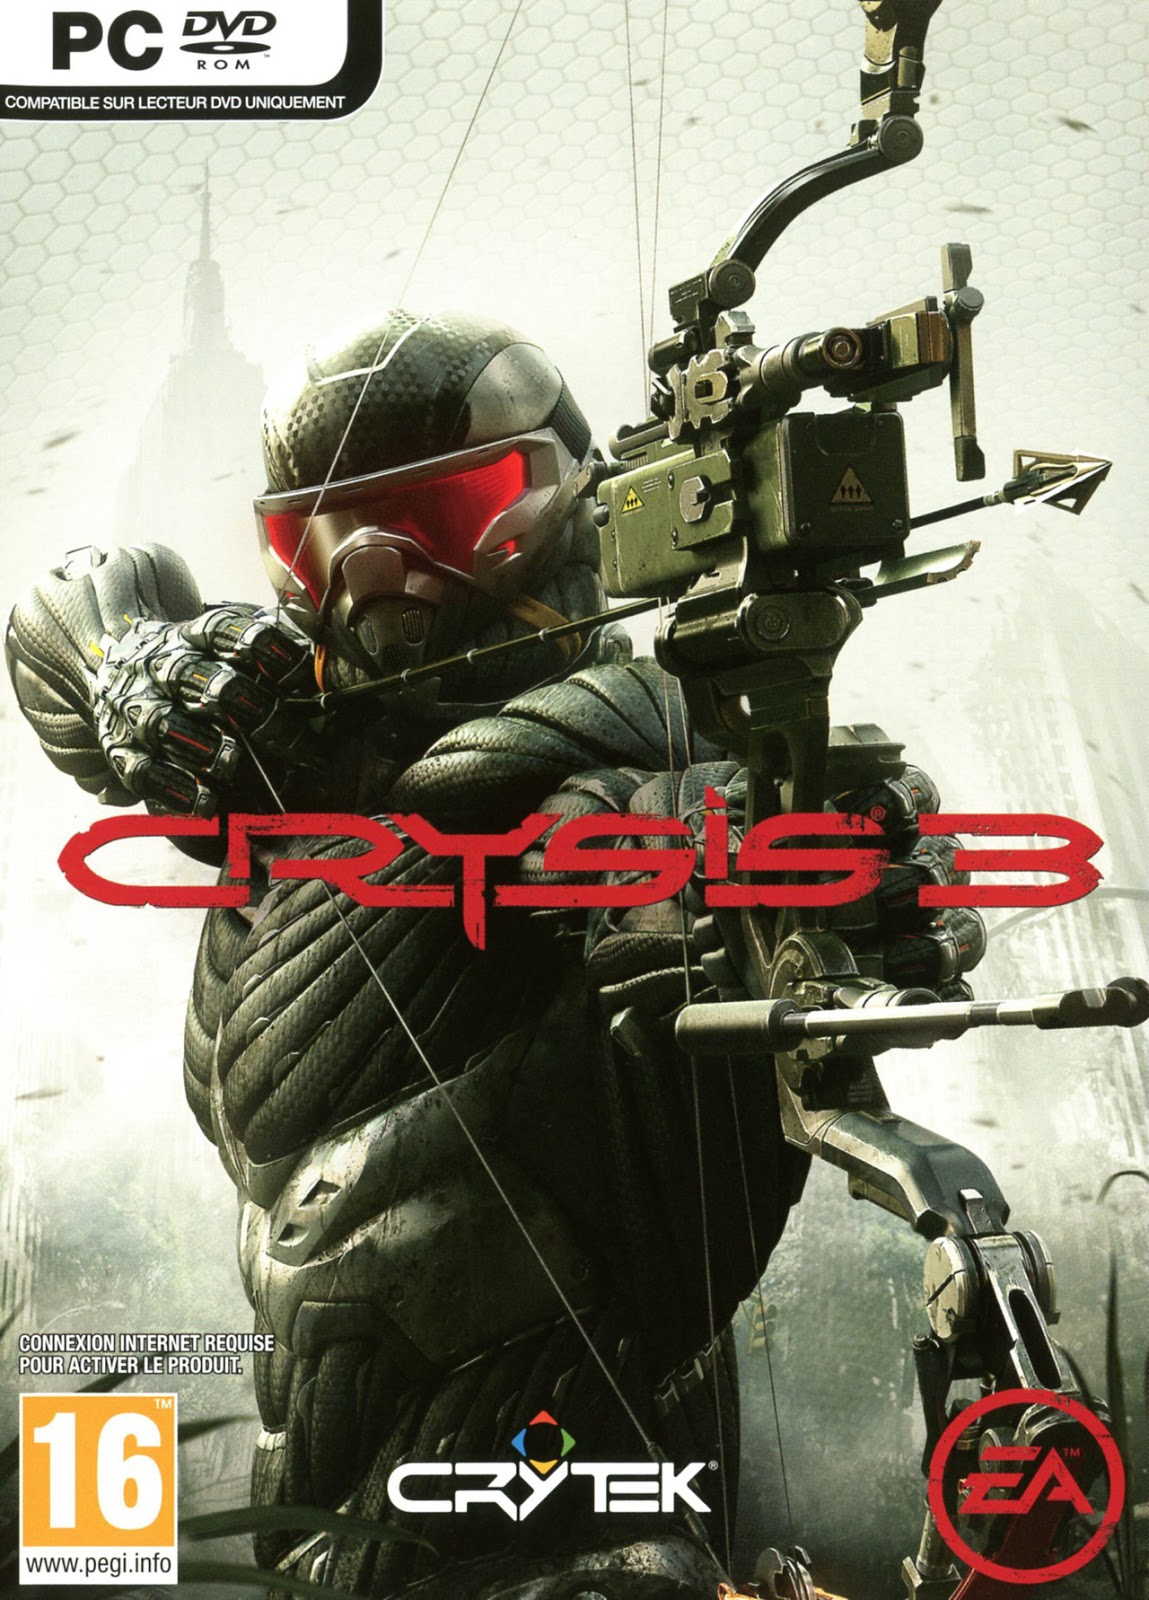 crys3.dll download for crysis 3